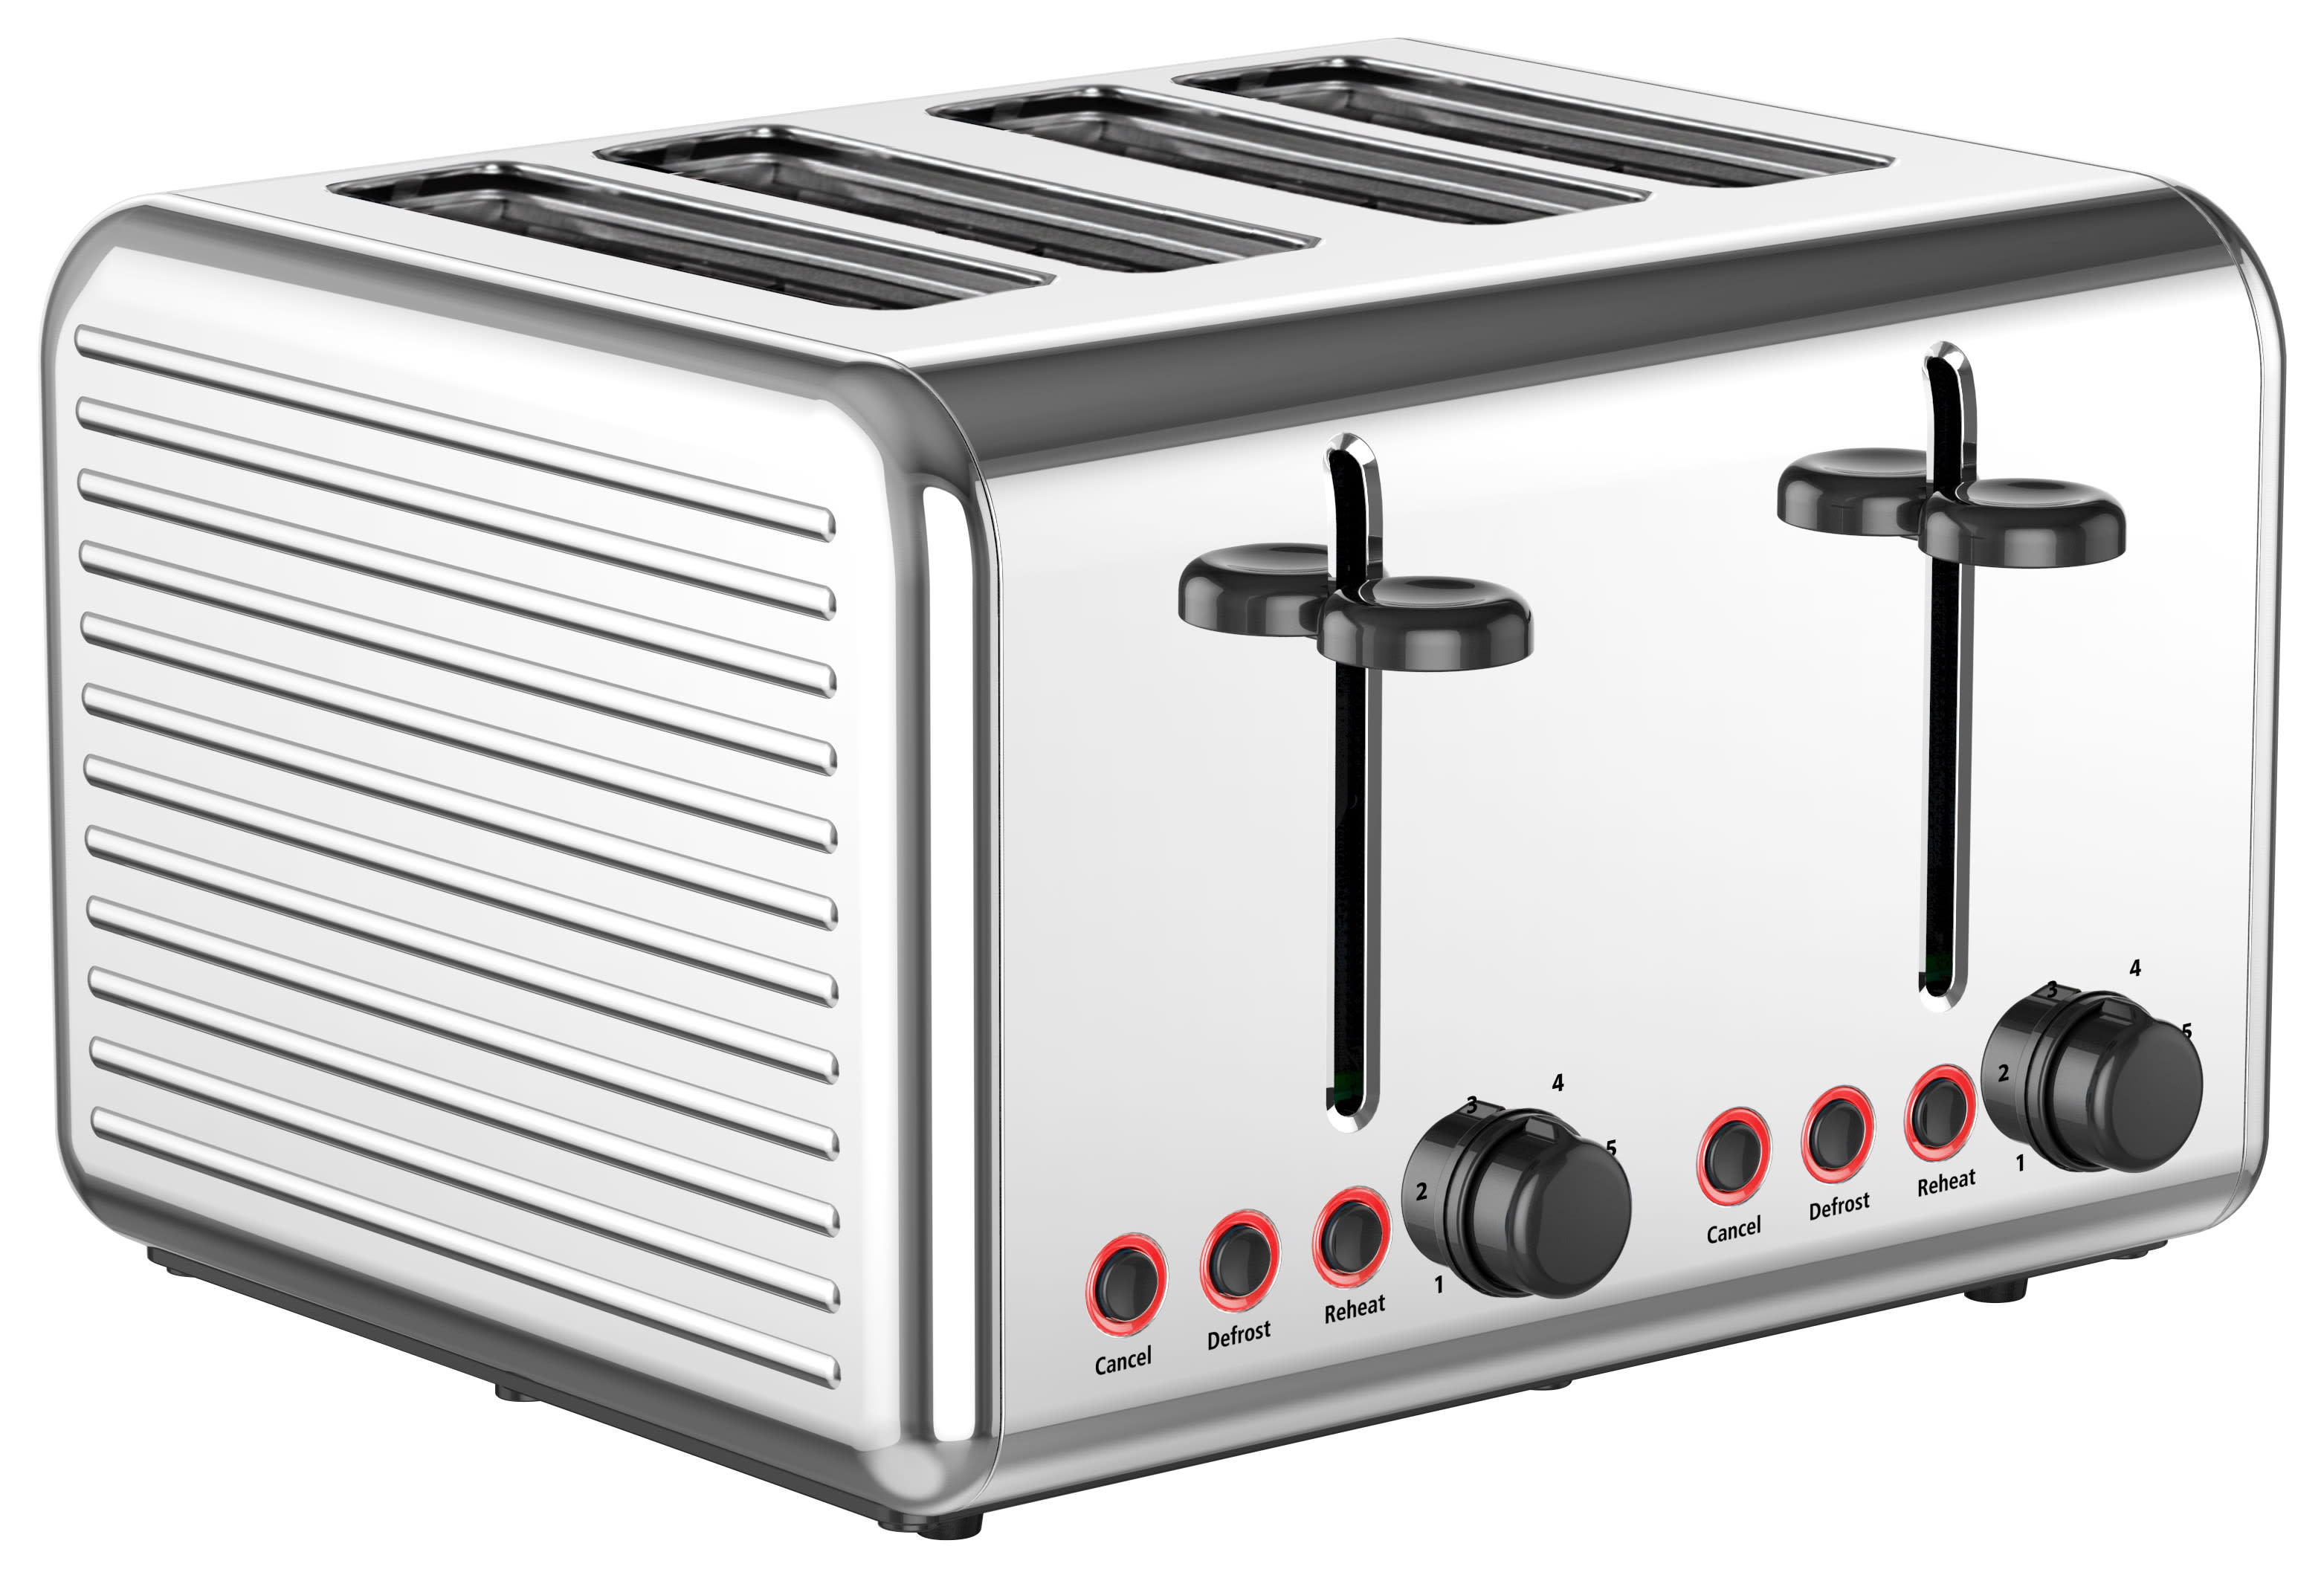 Sunbeam Ultimum - Four Slice Toaster for sale with Makro Outlet and bidorbuy